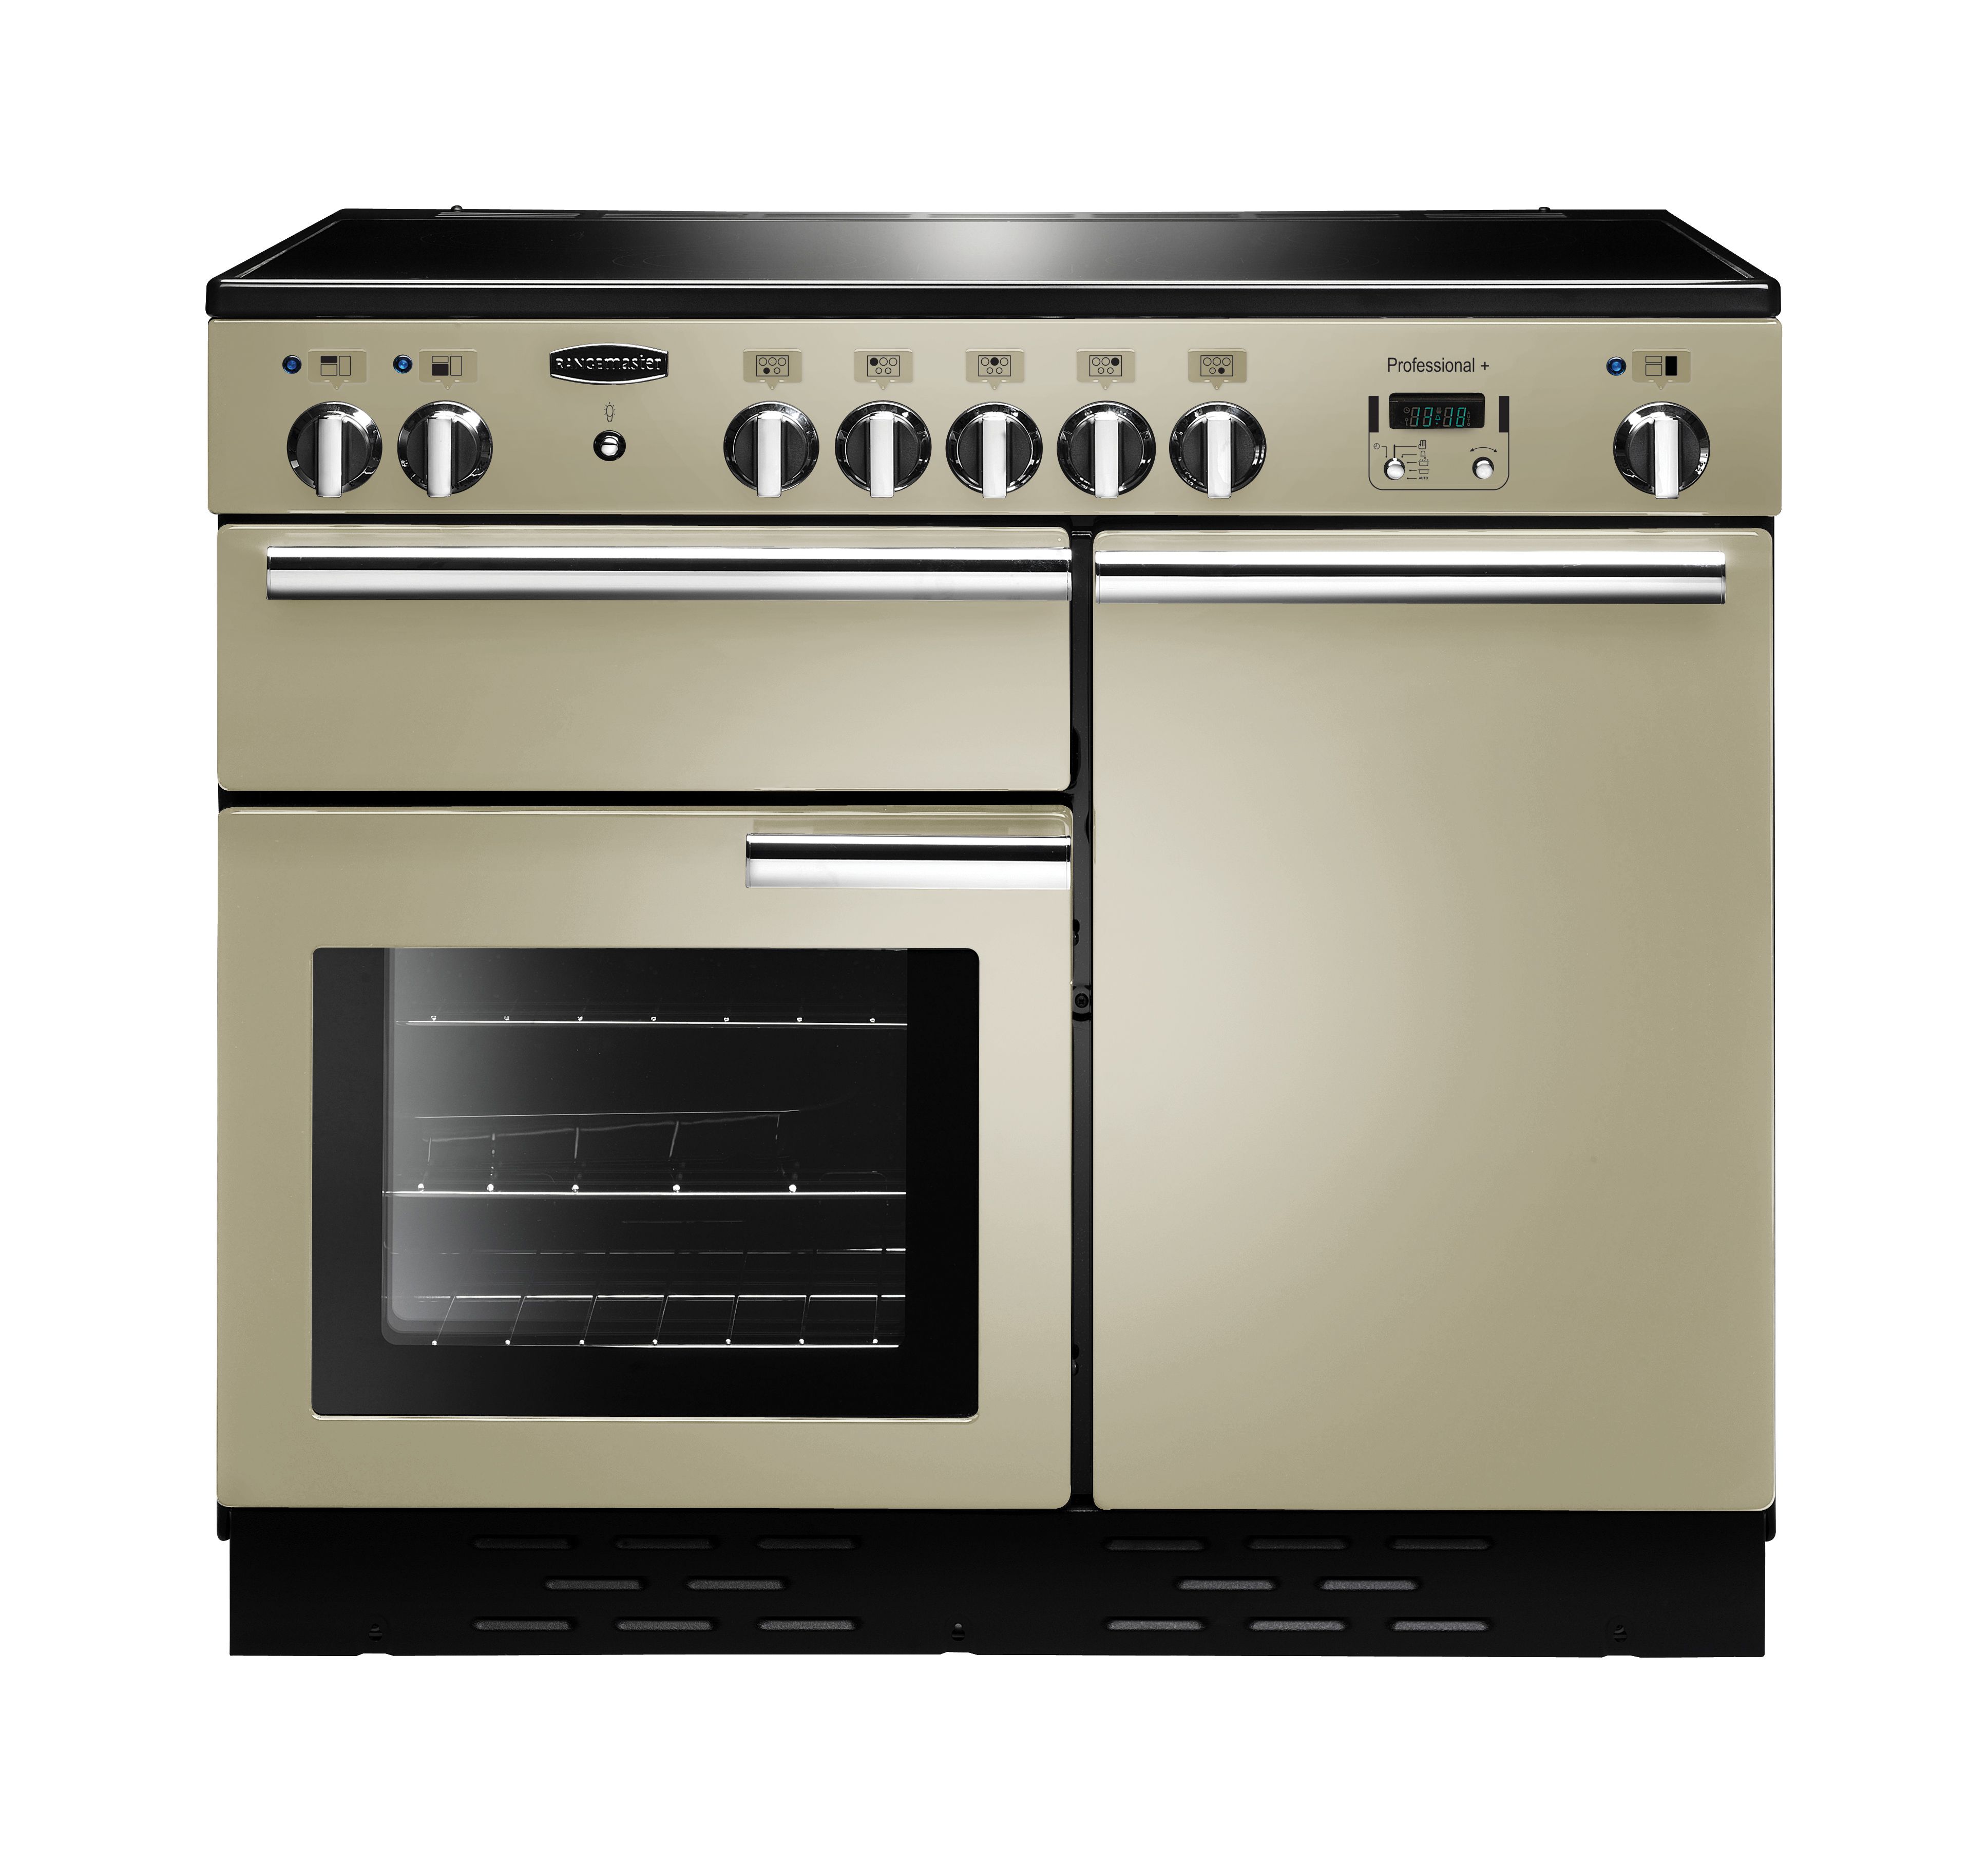 Rangemaster Professional Plus PROP100EICR/C 100cm Electric Range Cooker with Induction Hob - Cream - A/A Rated, Cream